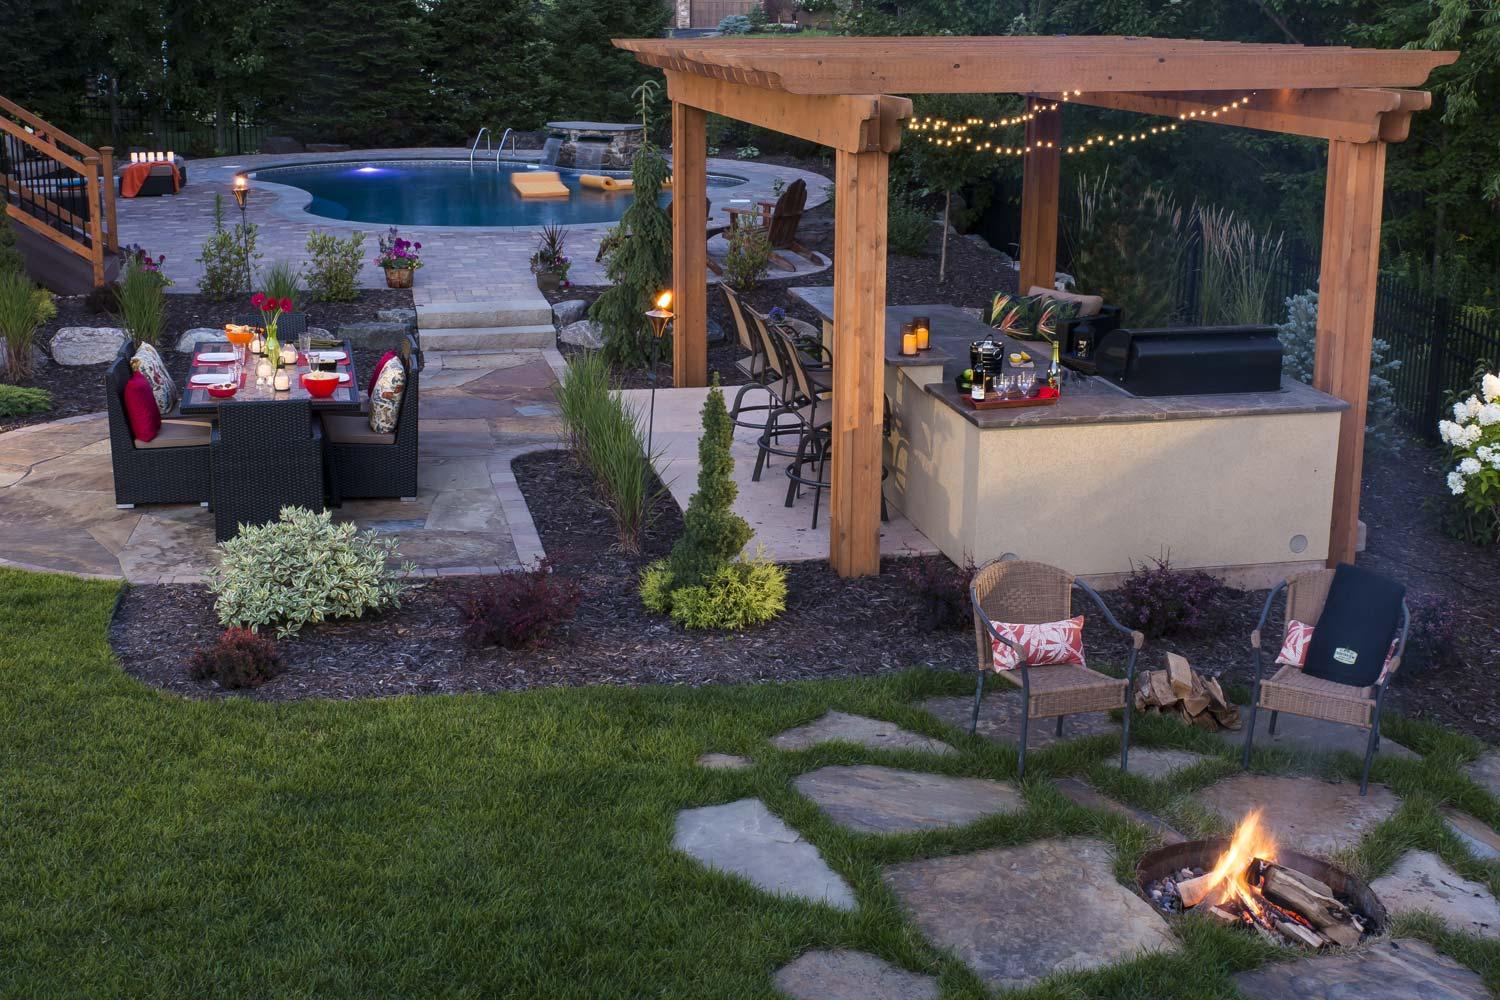 dining patio, fire pit, and pergola over outdoor kitchen and bar